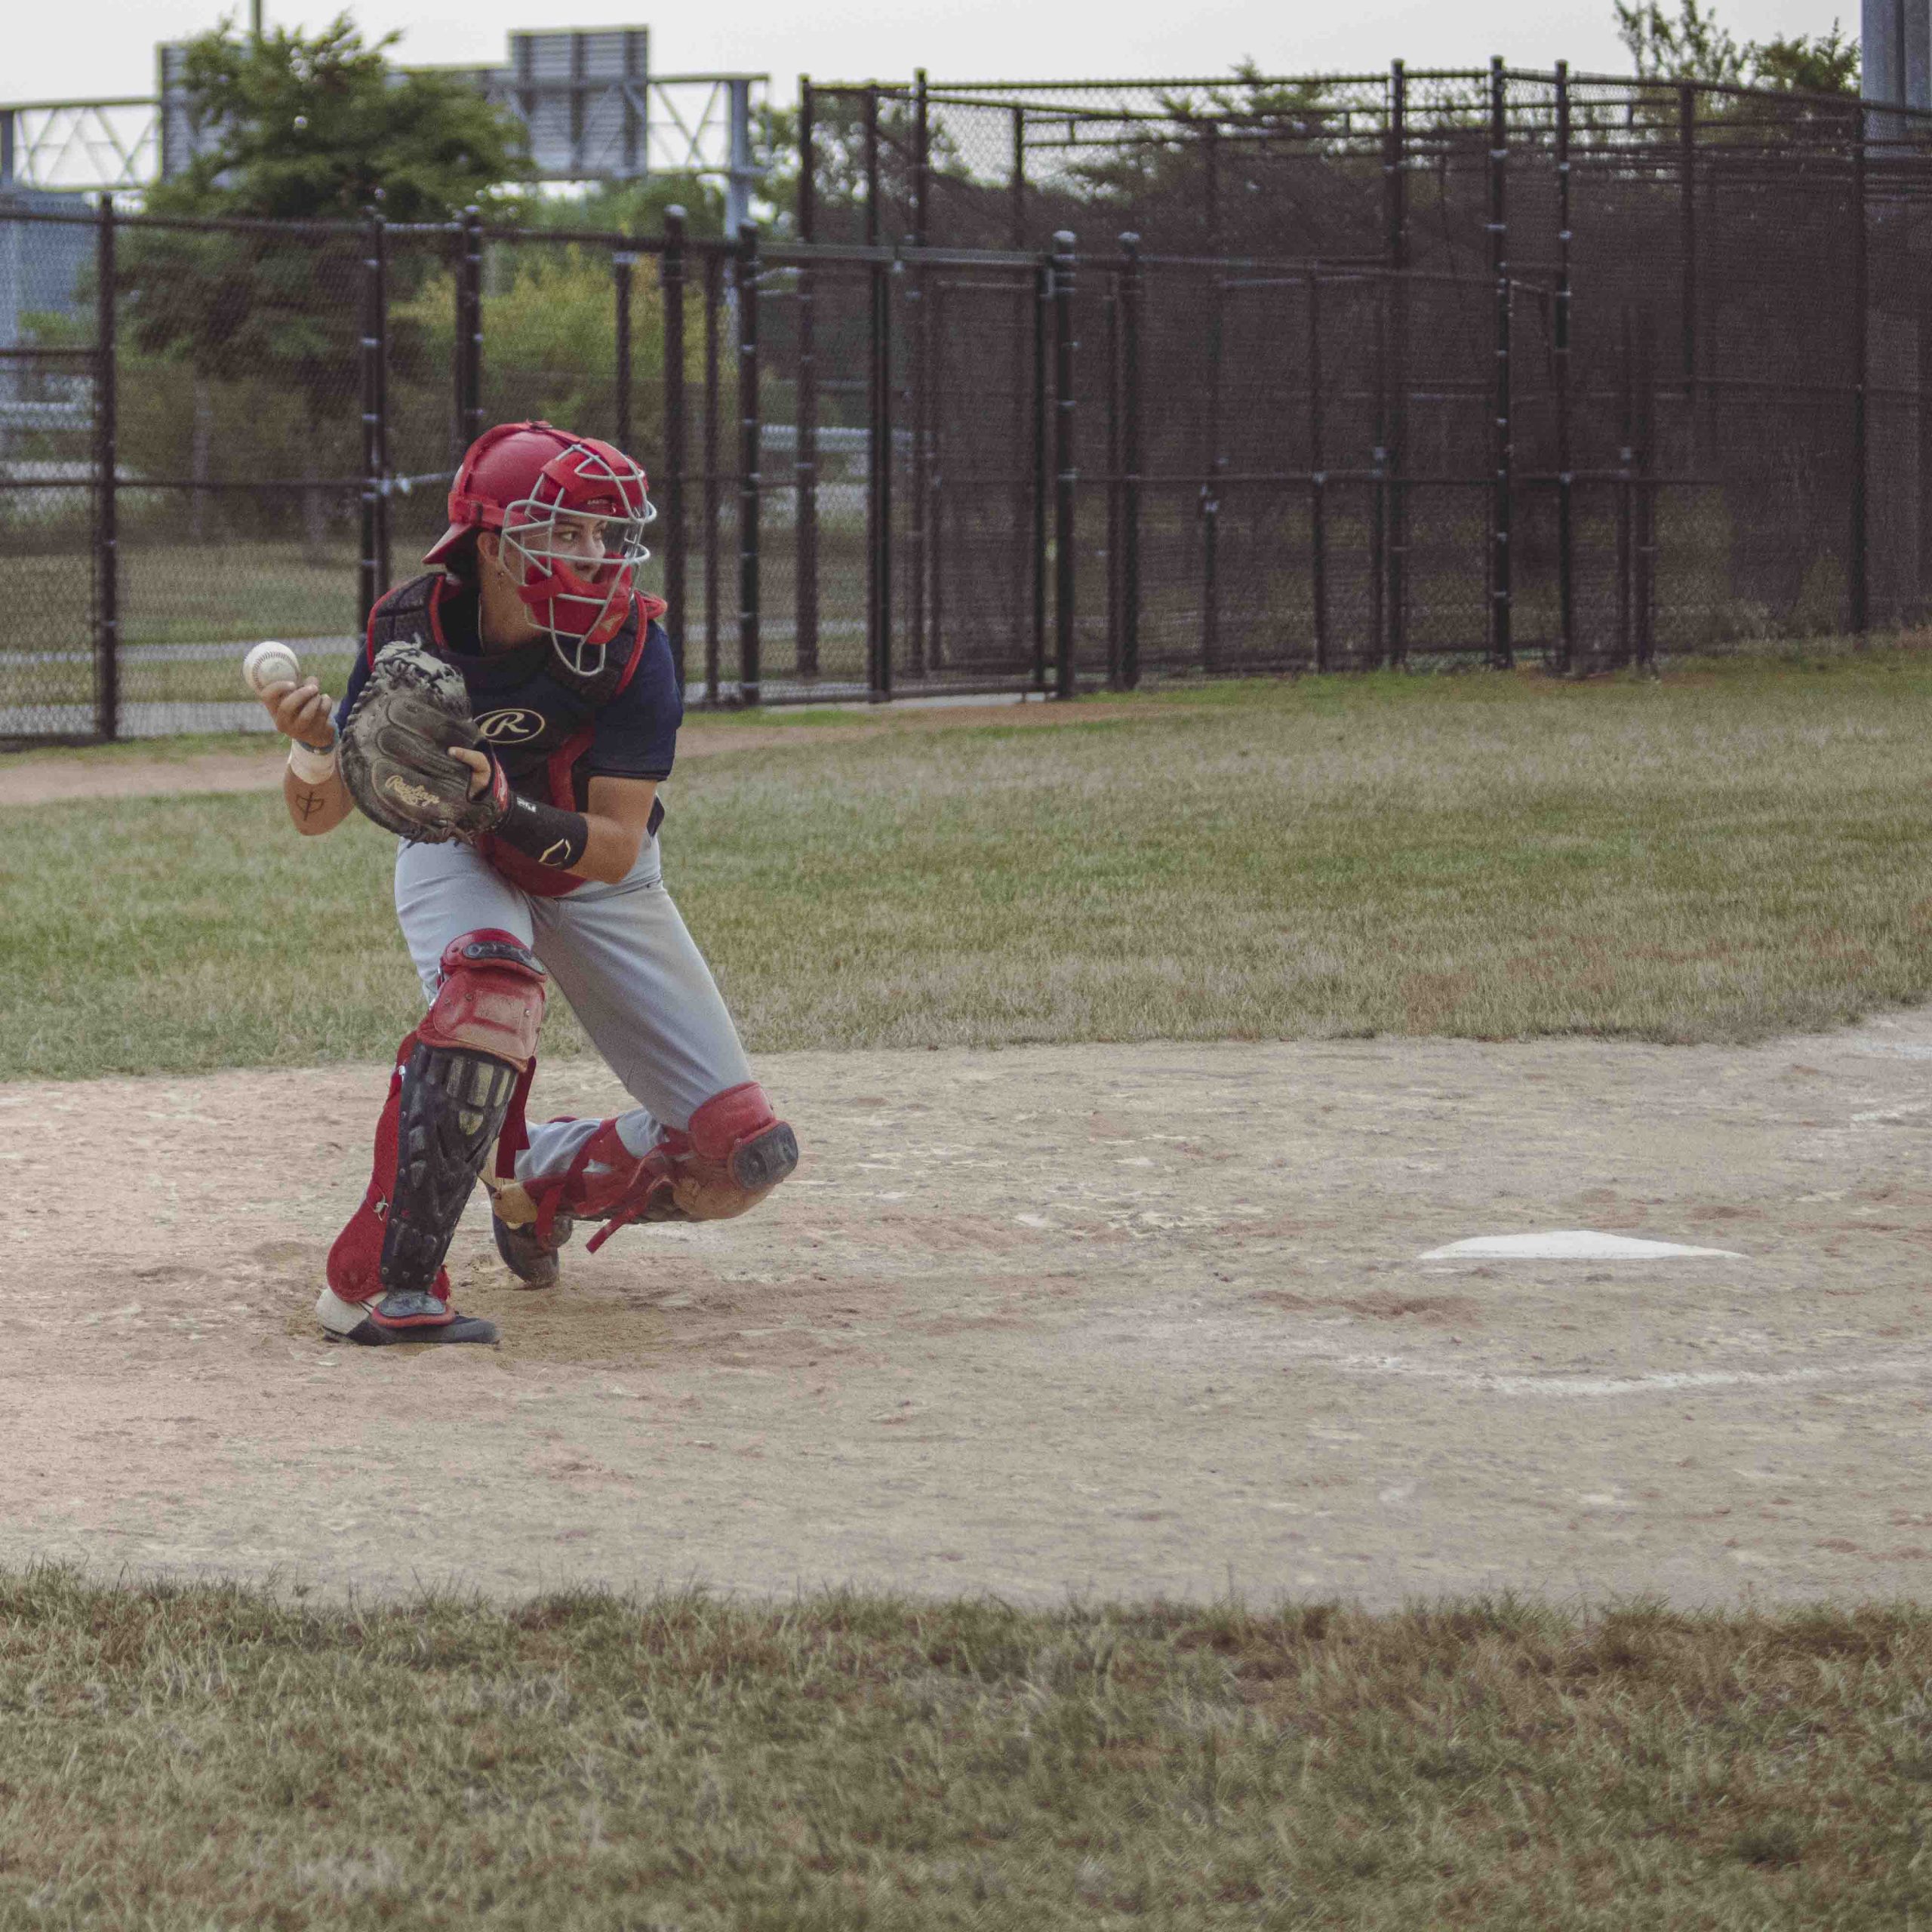 A baseball catcher about to throw the ball to the pitcher.